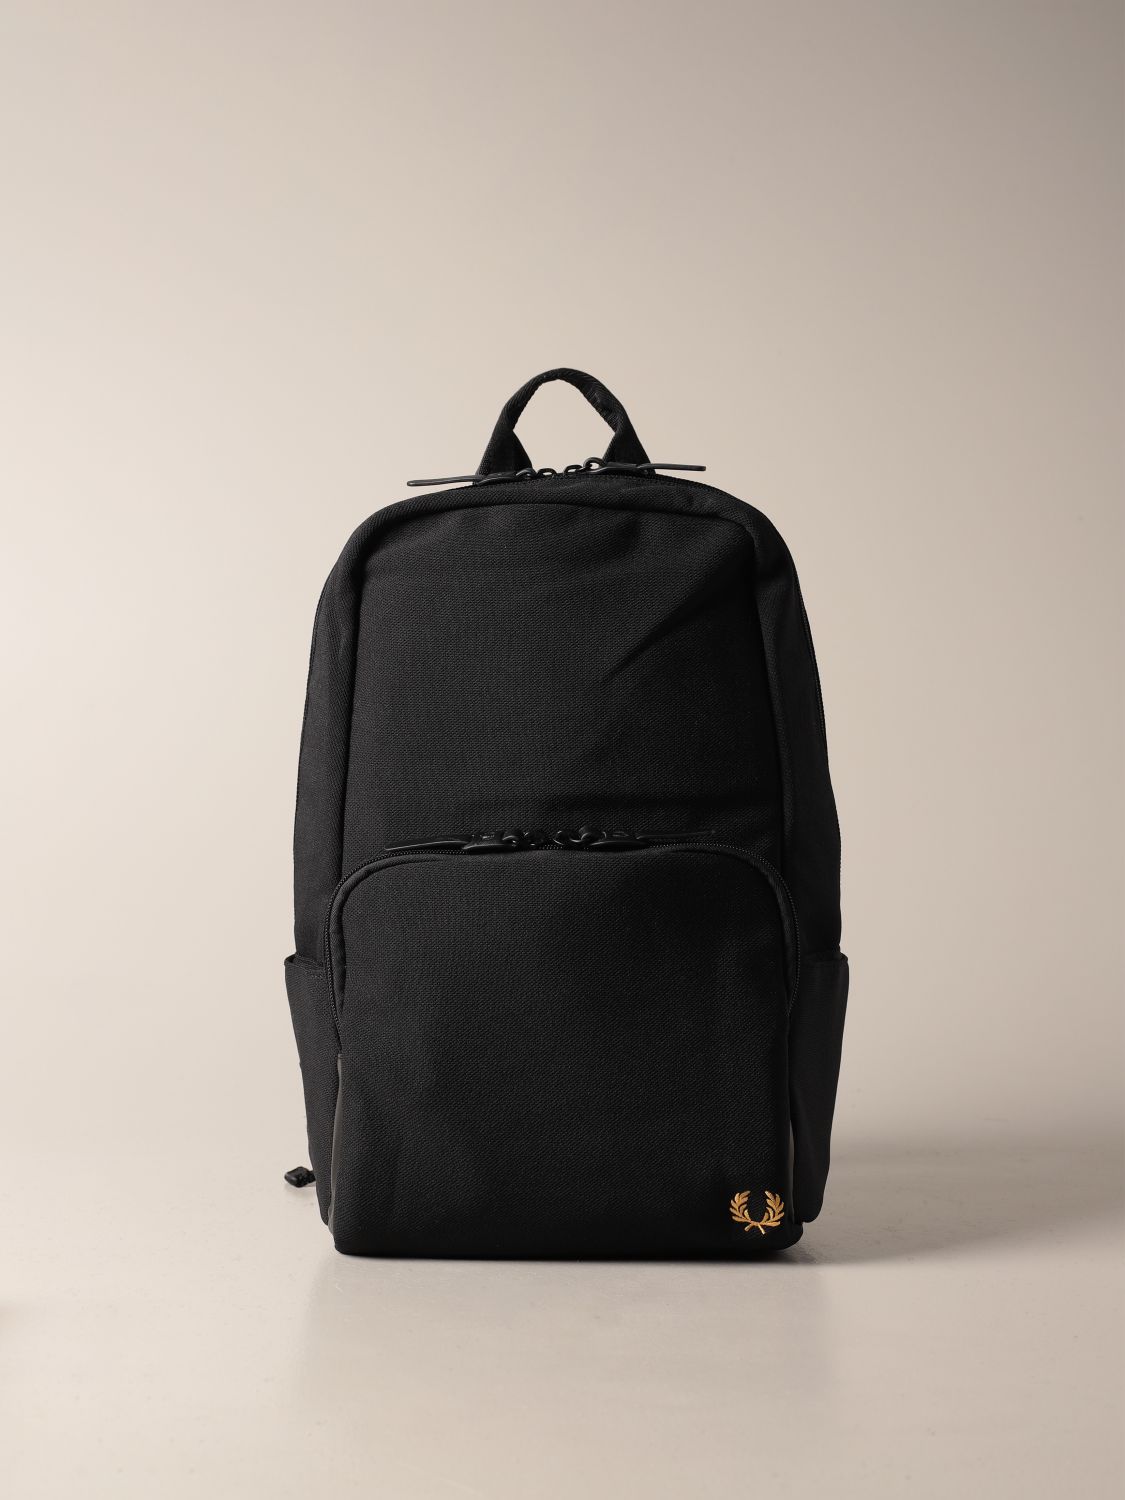 Fred Perry Backpack Sale, GET 59% OFF, sportsregras.com